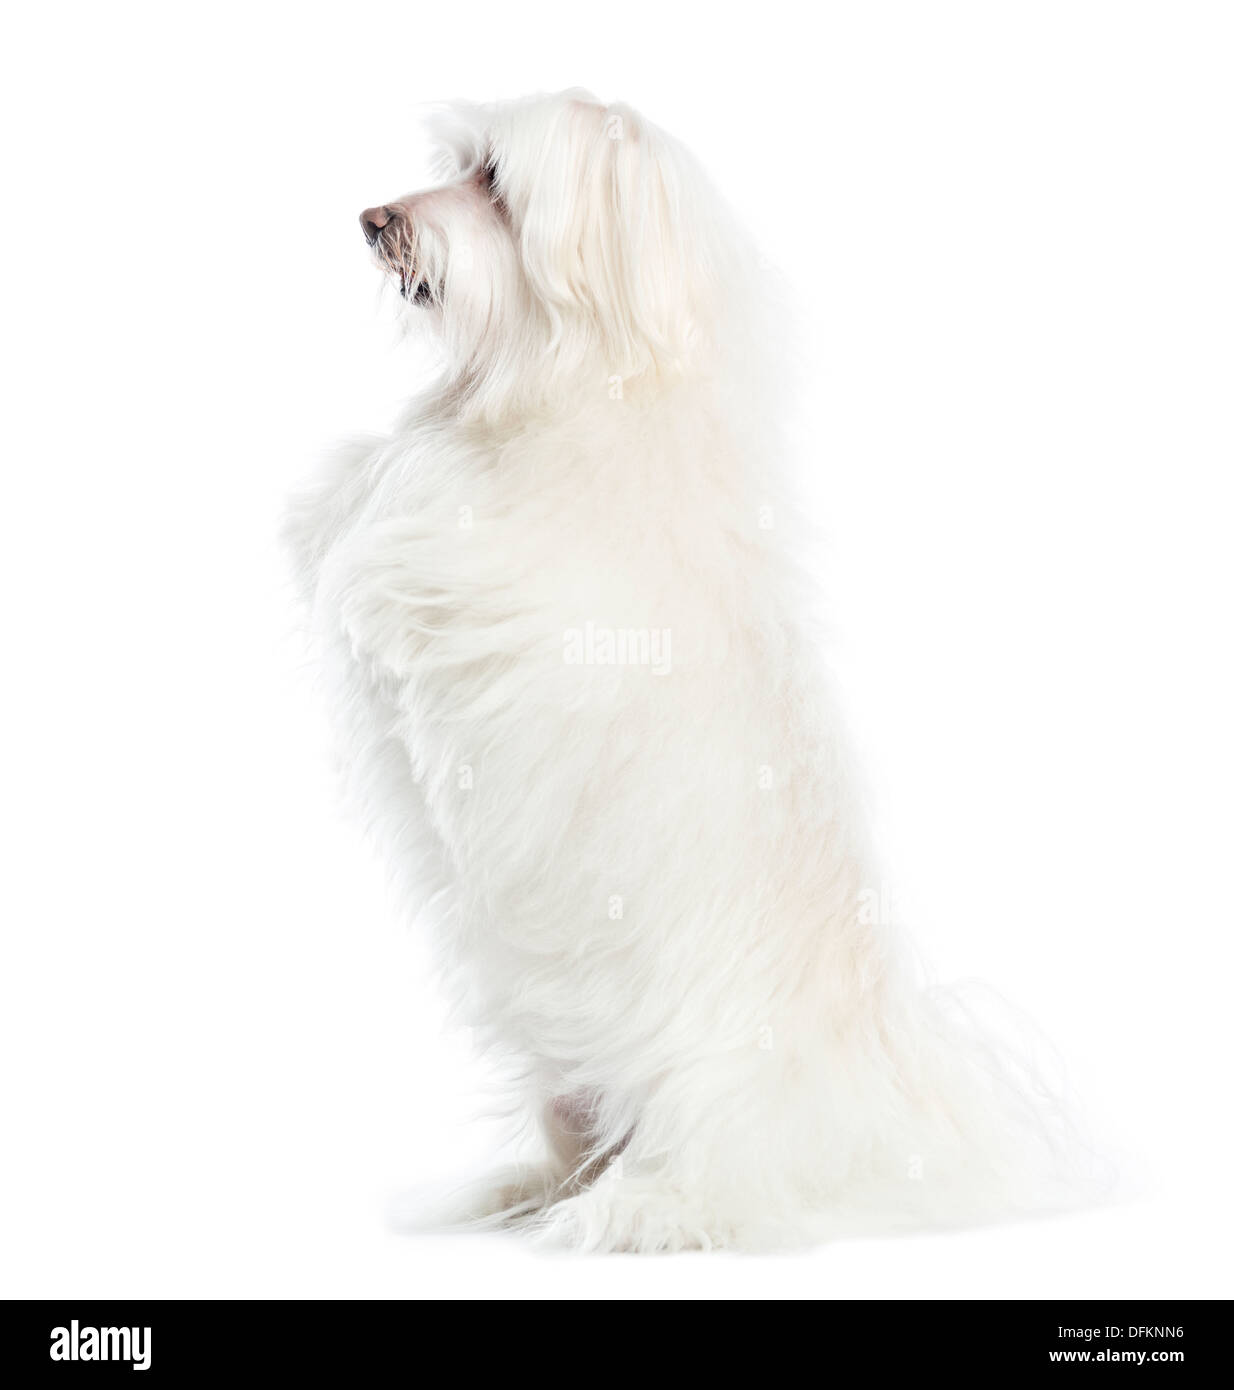 Side view of a Maltese upright, against white background Stock Photo